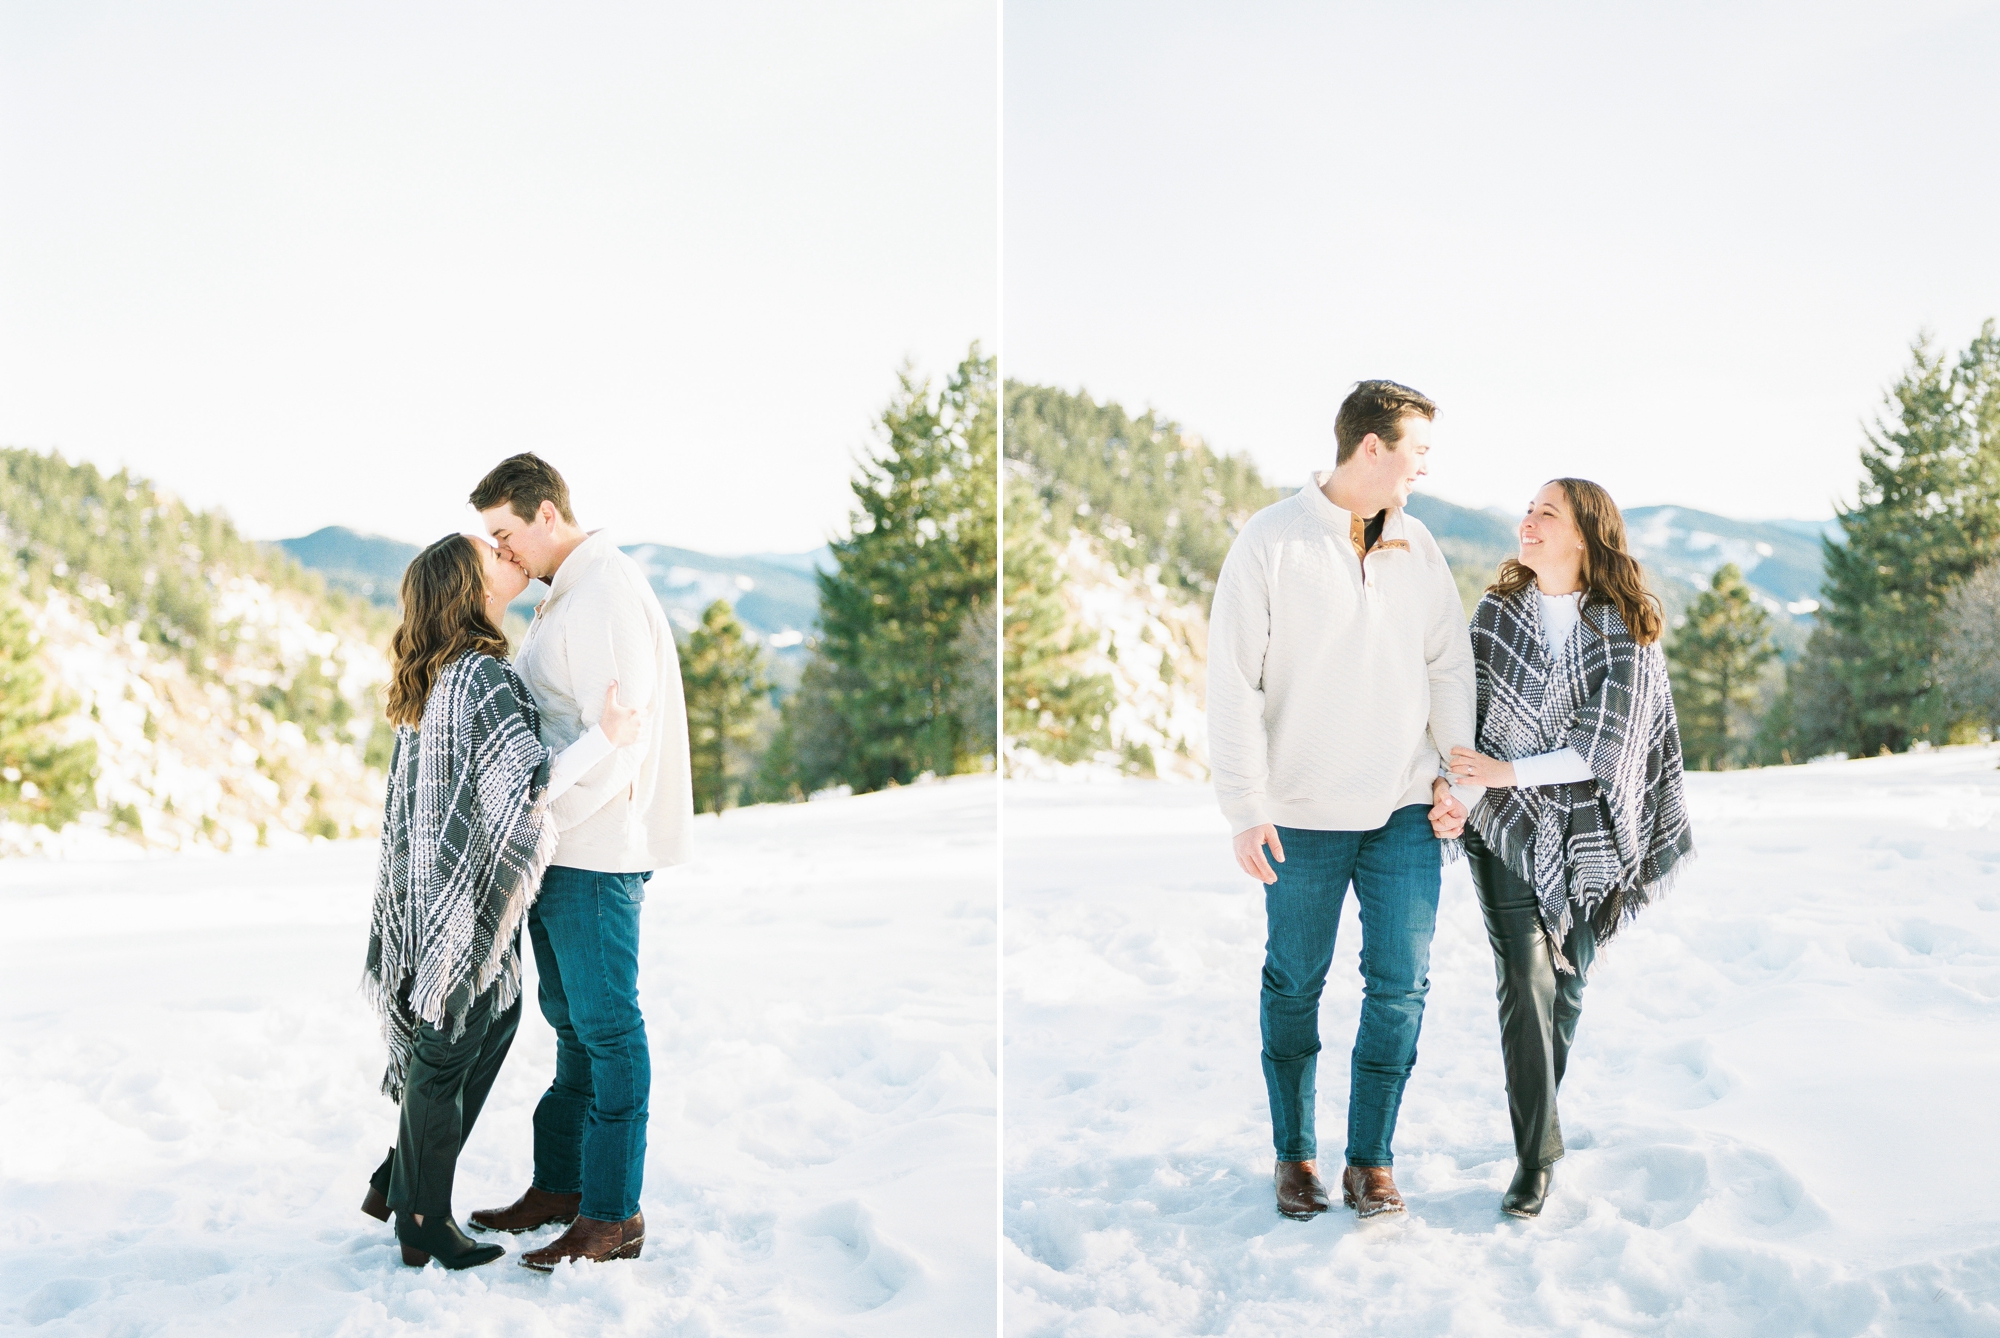 Film engagement photos of a couple in a snowy mountain location